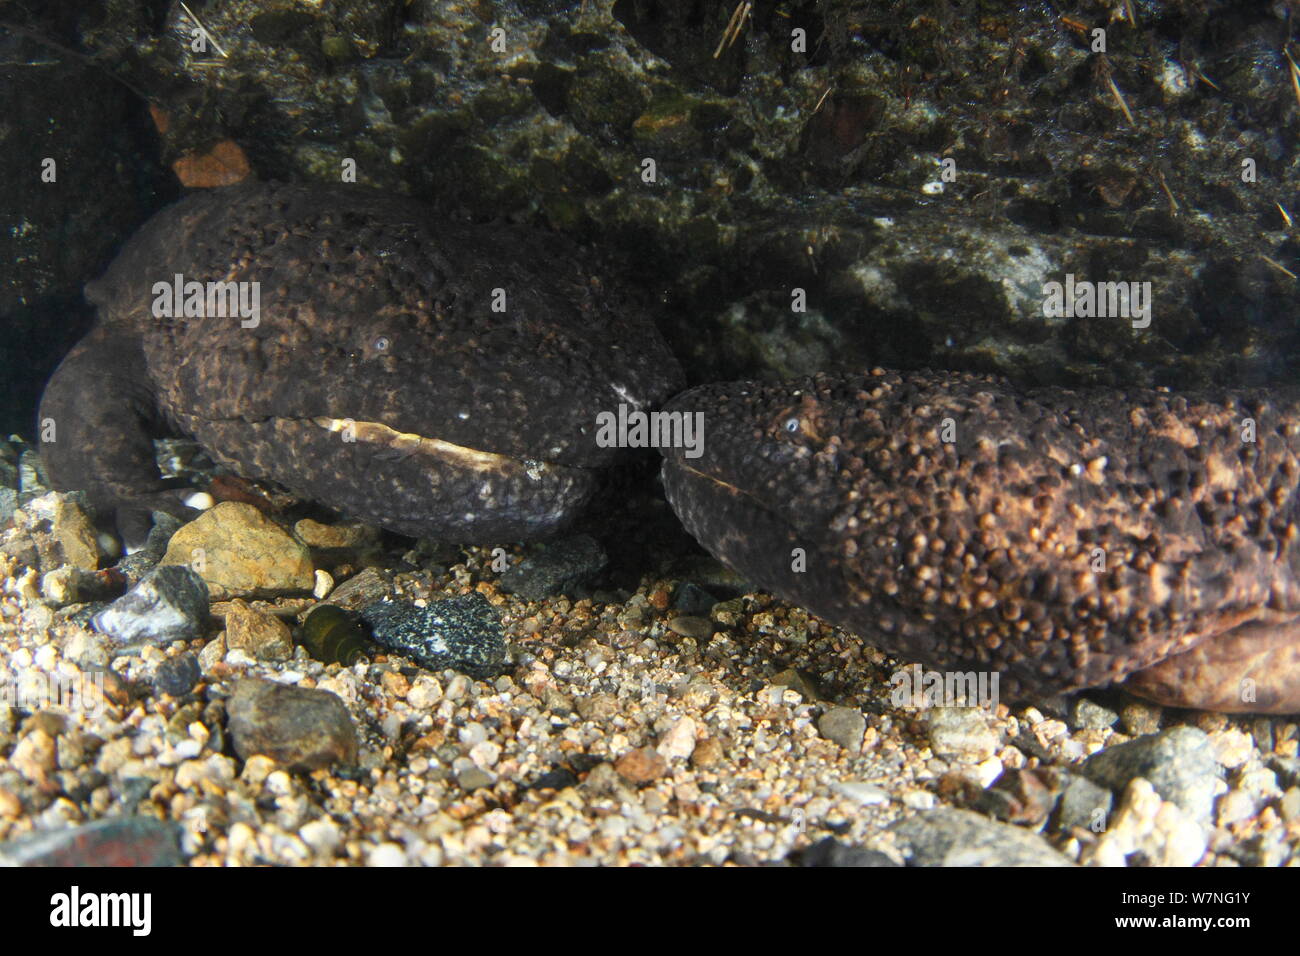 Male Japanese giant salamanders (Andrias japonicus) protecting the entrance of his nest from a second salamander, Japan, August Stock Photo